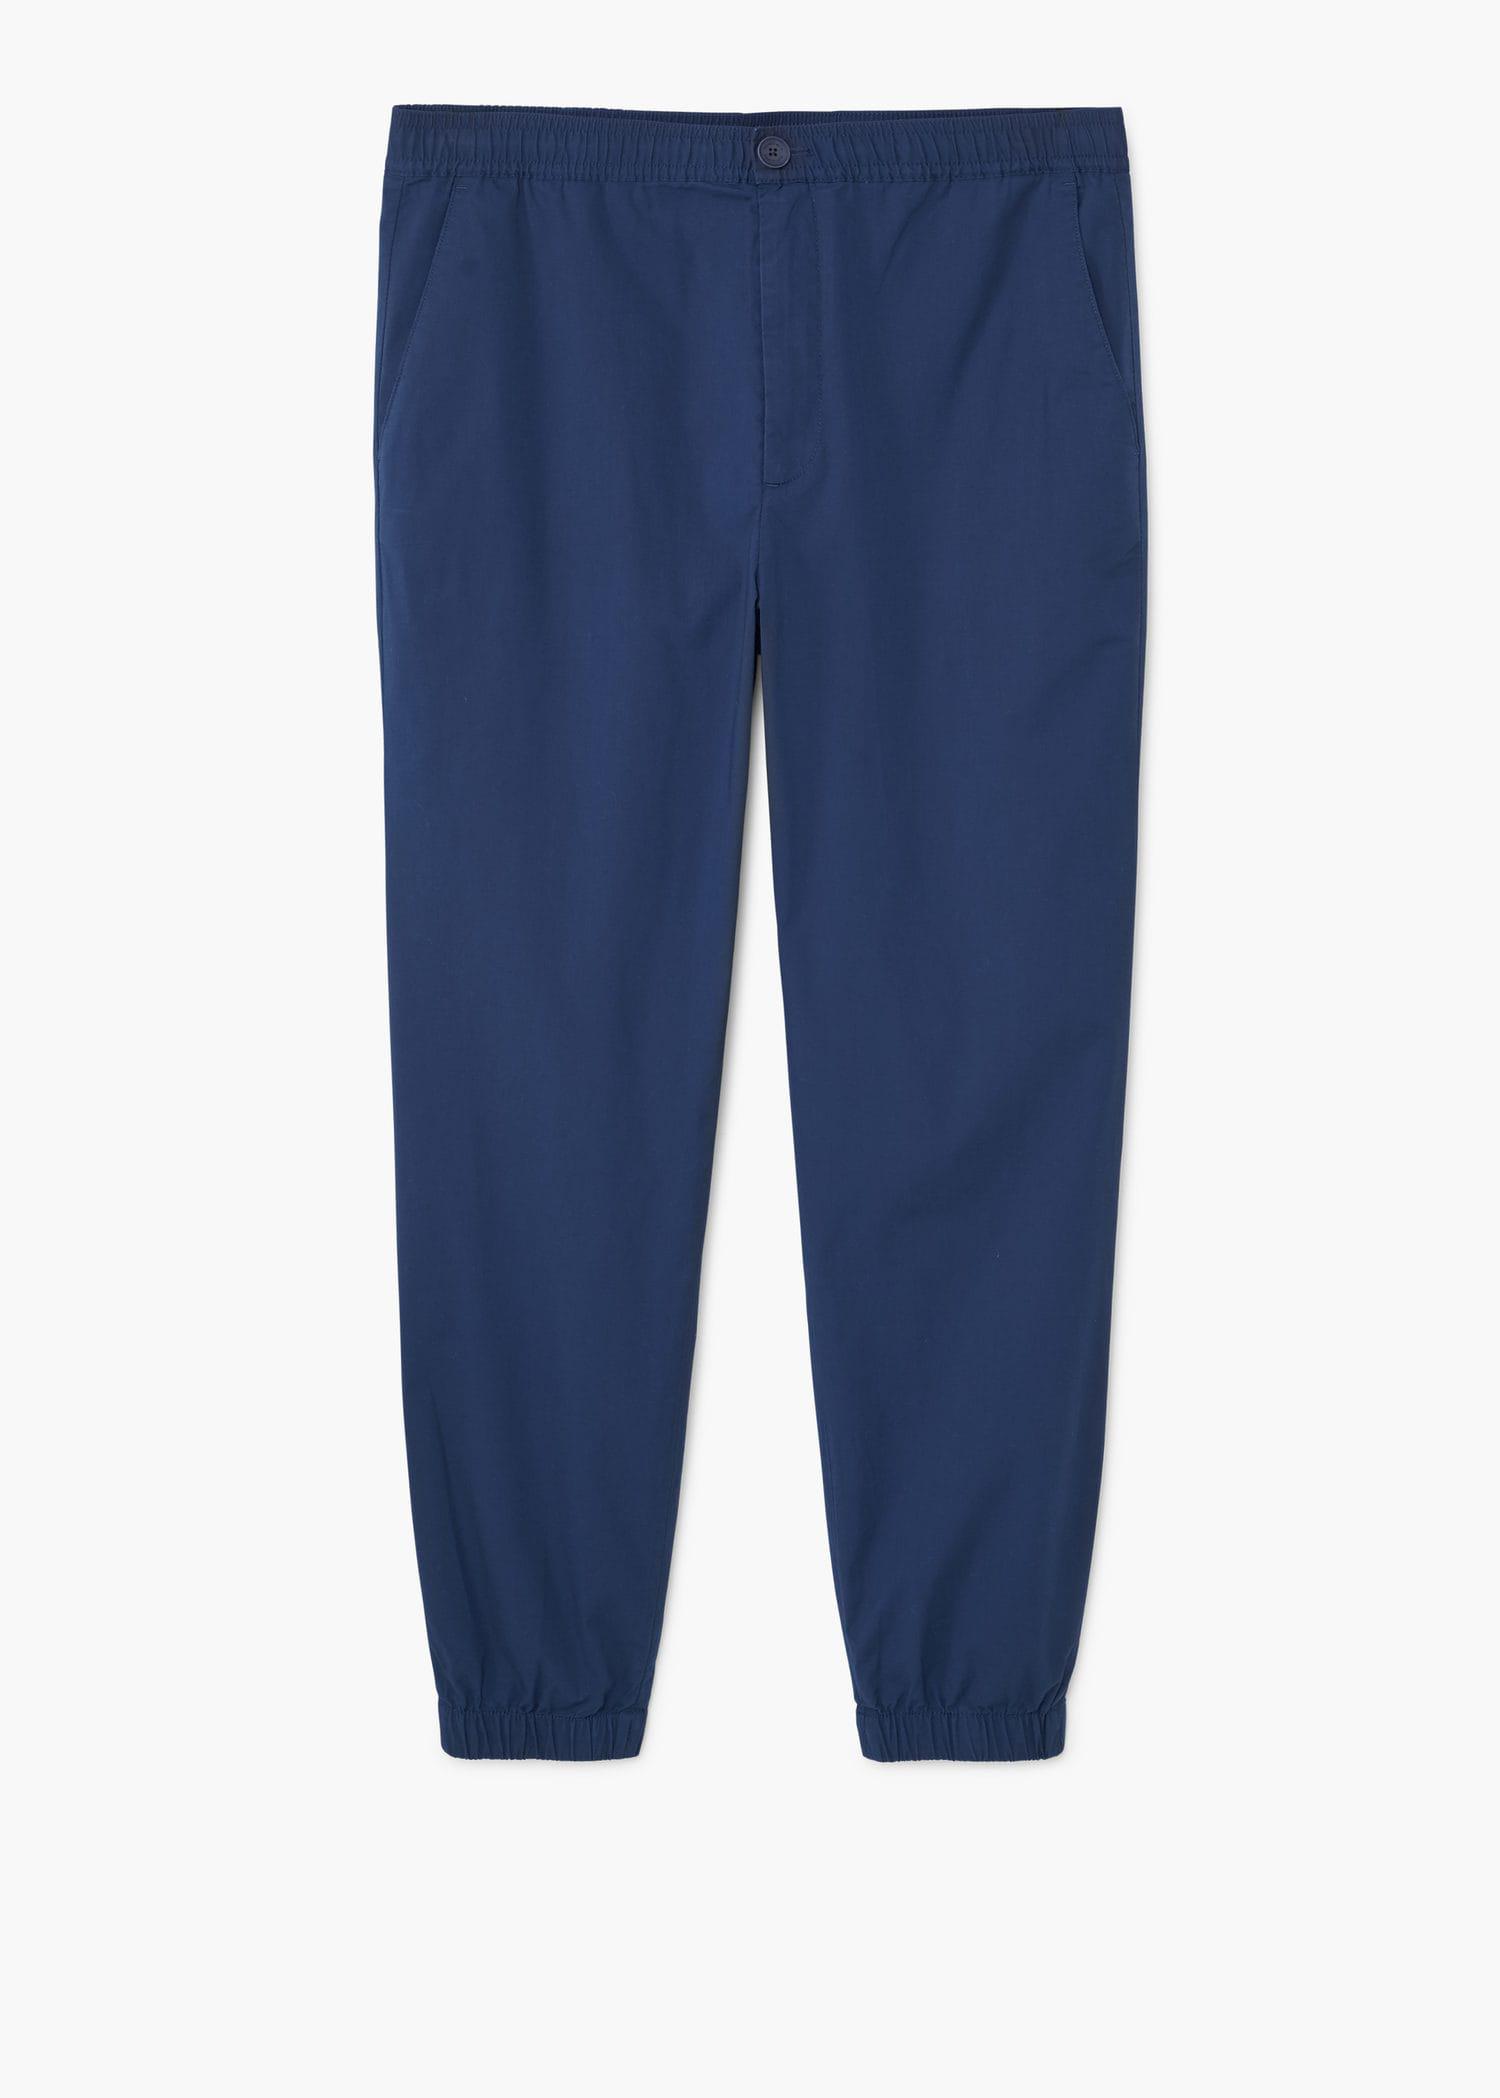 Lyst - Mango Stretch Cotton Trousers in Blue for Men